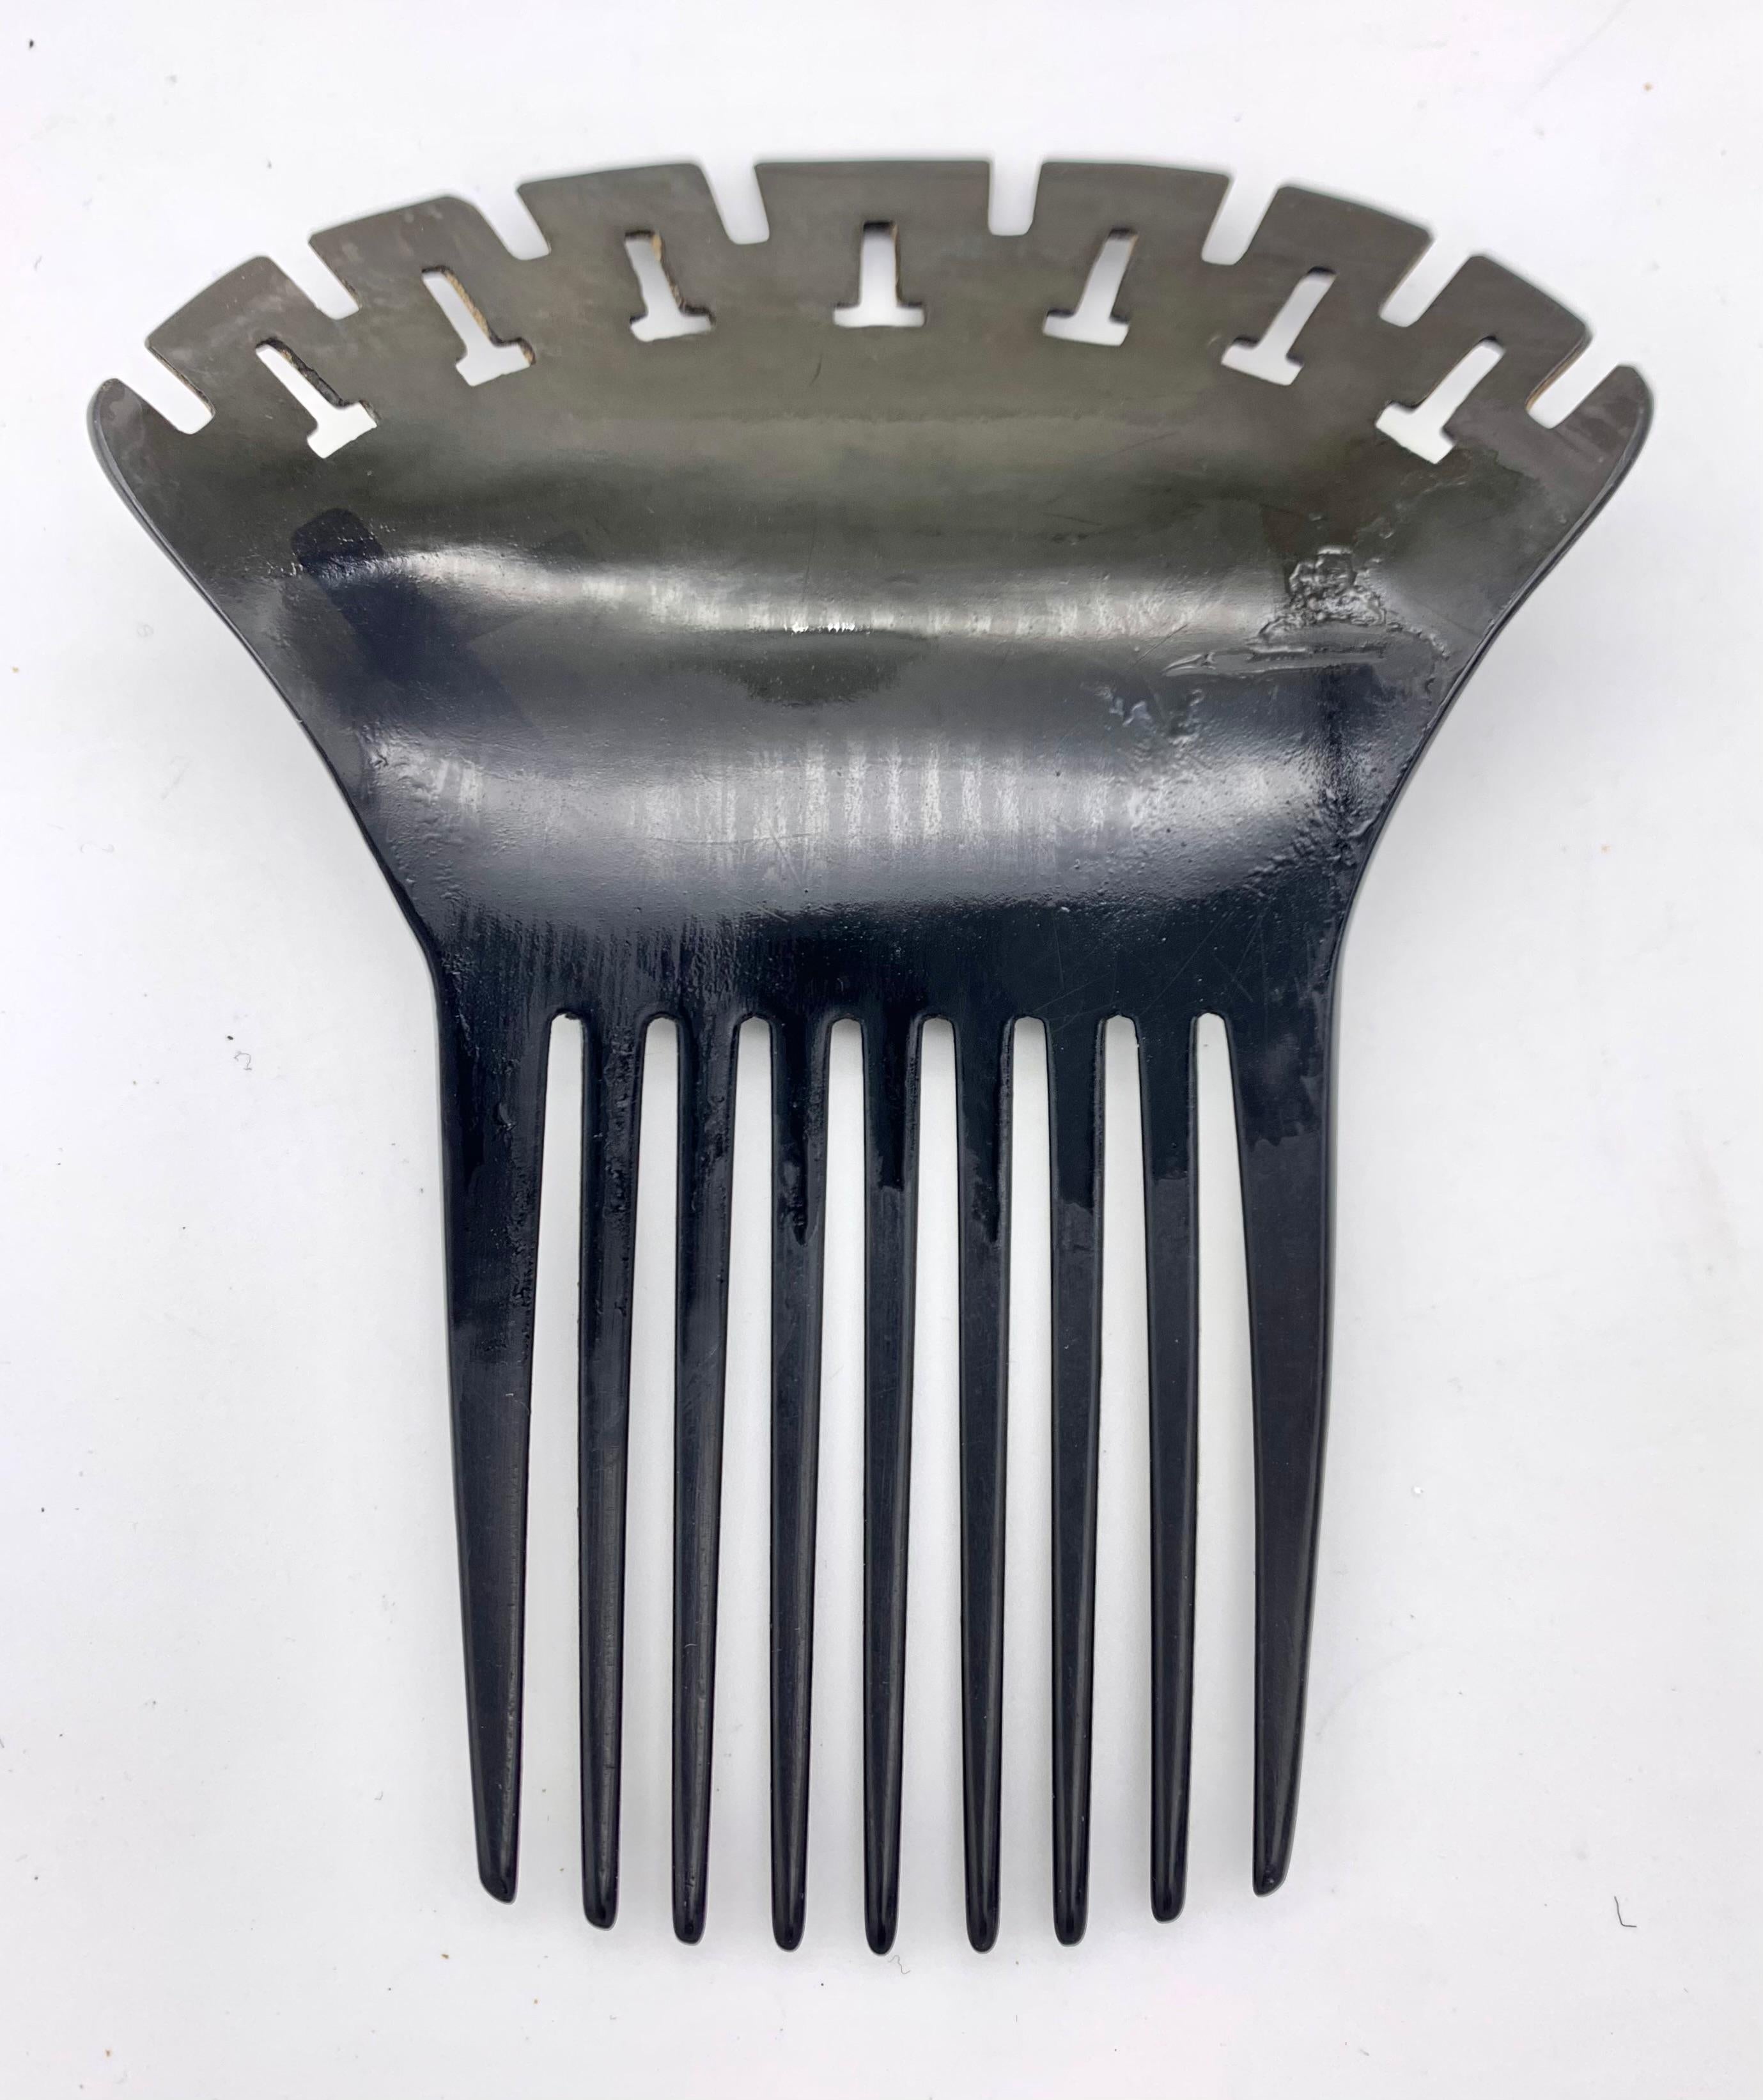 This Victorian vulcanite hair comb is decorated with a Greek Revival Key Pattern ornament. 
Vulcanite, also known as gutta percha, is a natural material made out of rubber. It was popular and widely used for jewellery and vanity objects in the